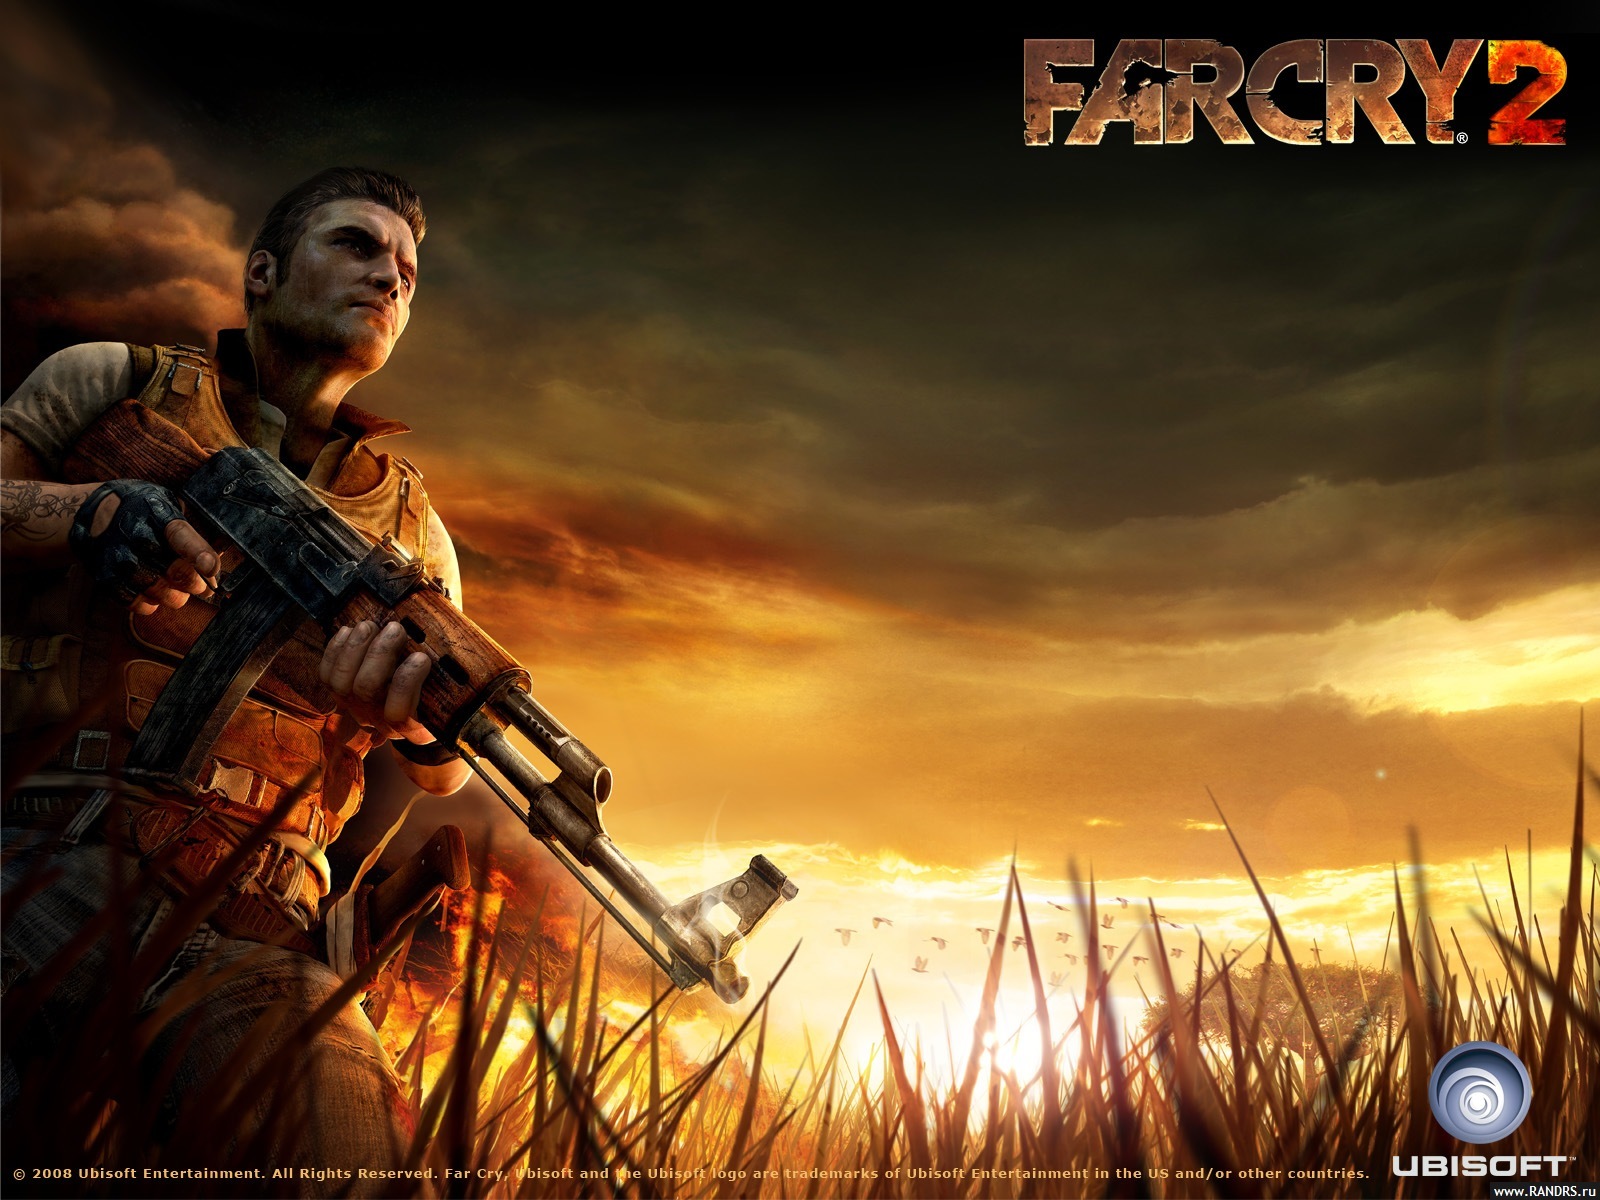 games, people, men, far cry 2